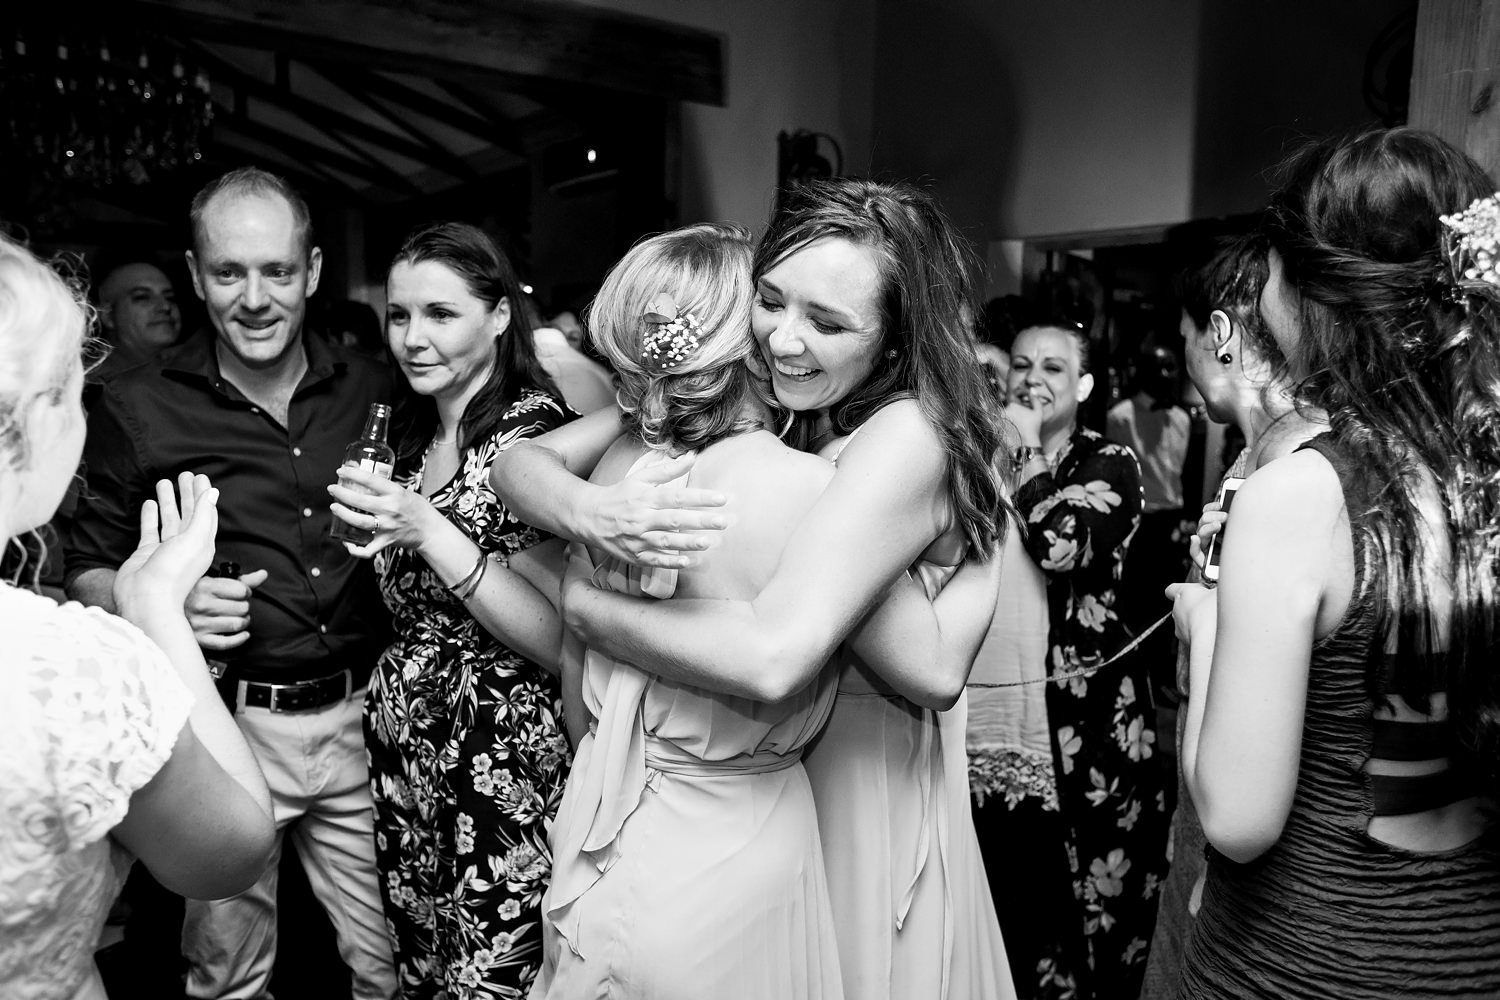 The bride and her bridesmaid hug in the middle of the dancefloor